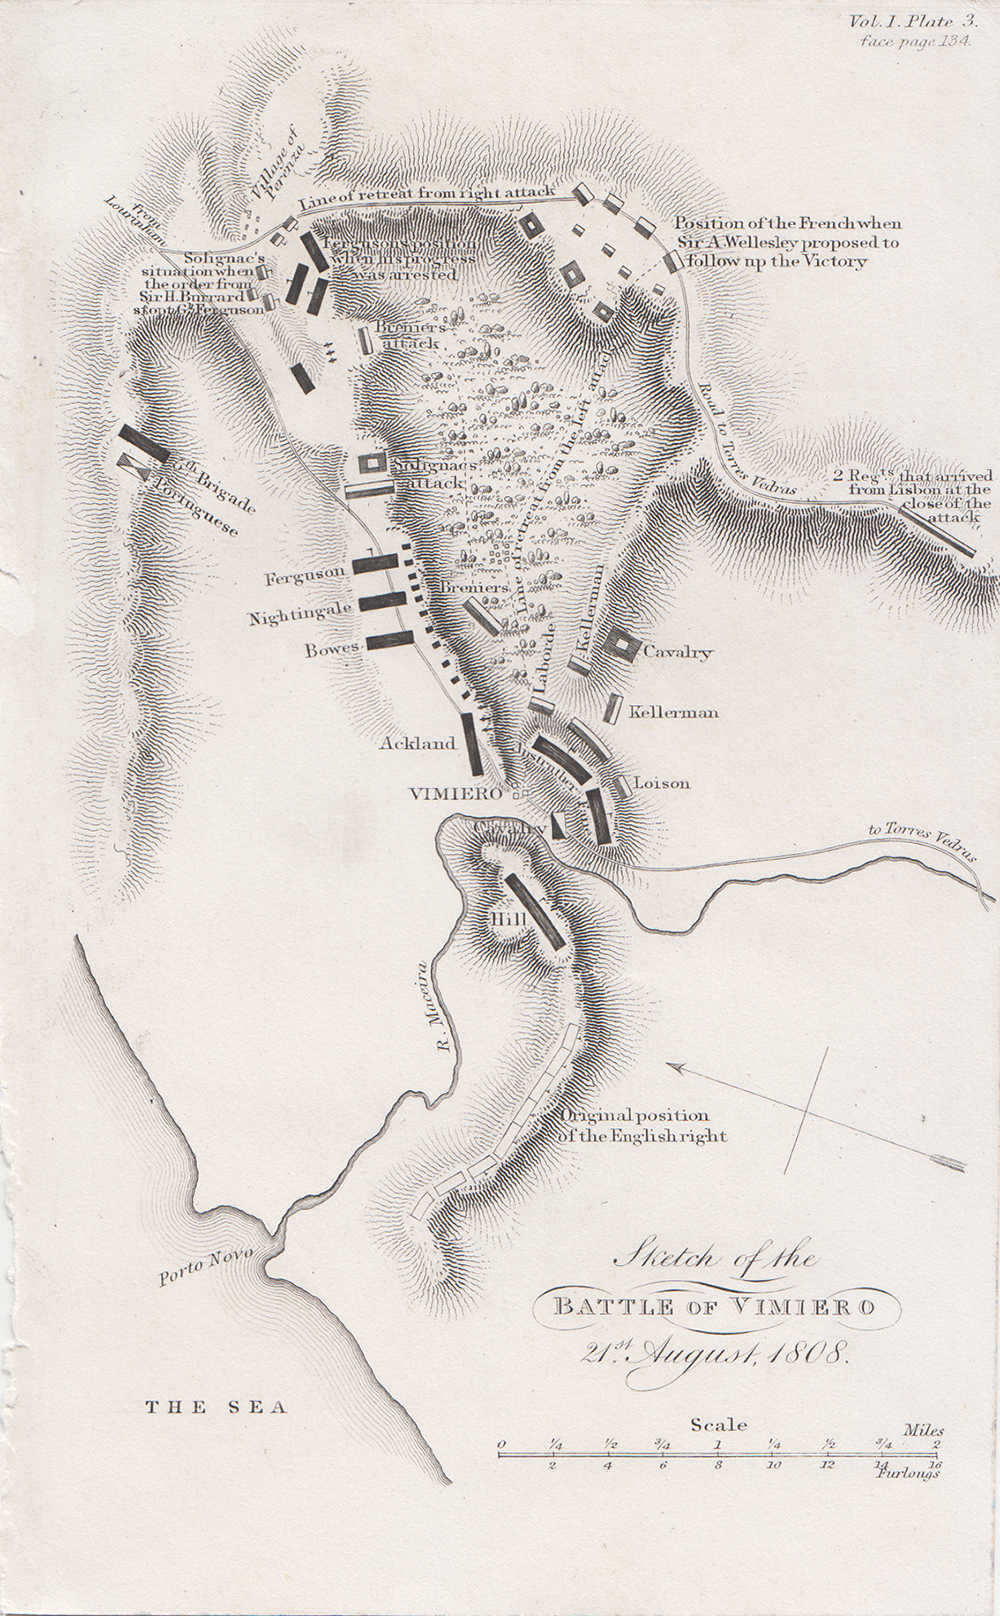 Sketch of the Battle of Vimiero  21st August 1808